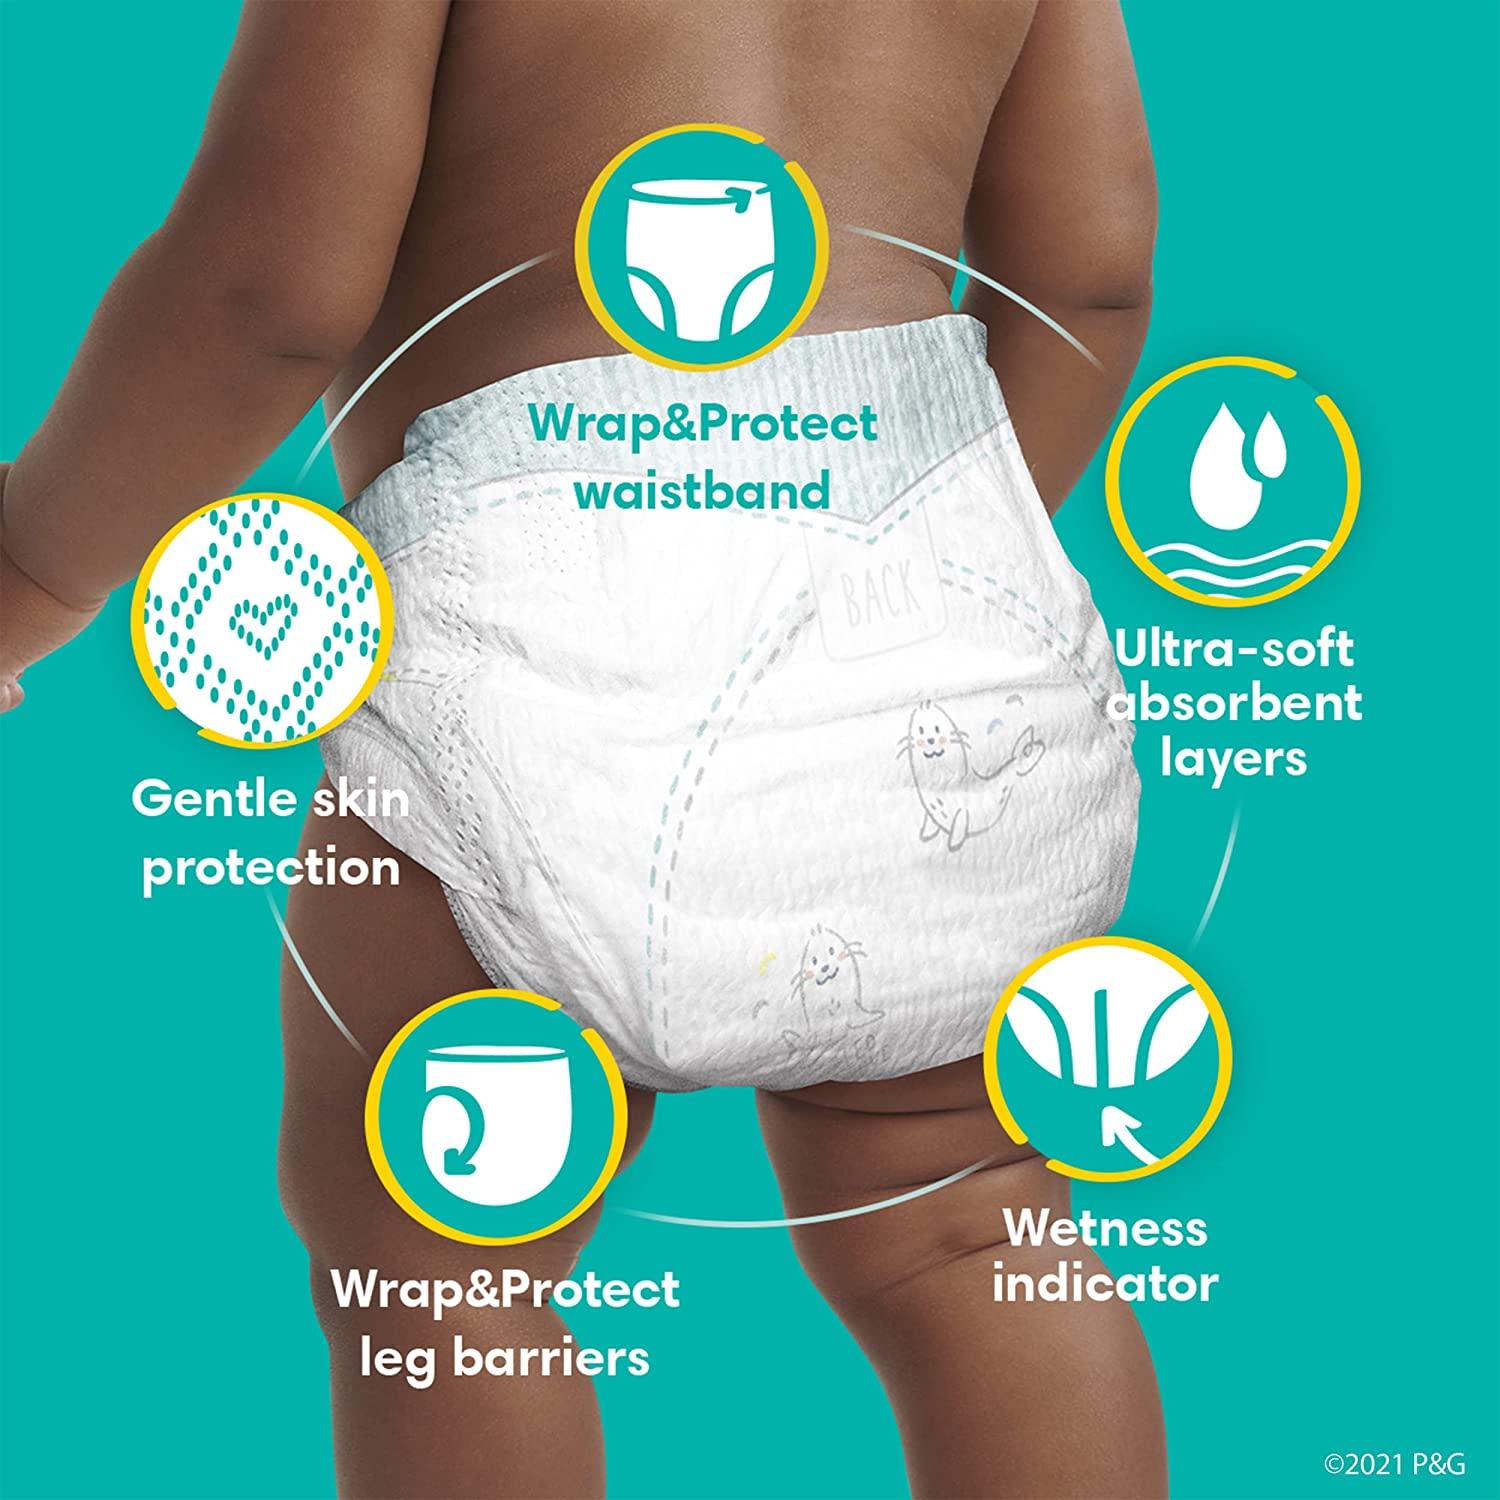 Pampers Swaddlers Diapers - Size 4, One Month Supply (150 Count), Ultra  Soft Disposable Baby Diapers